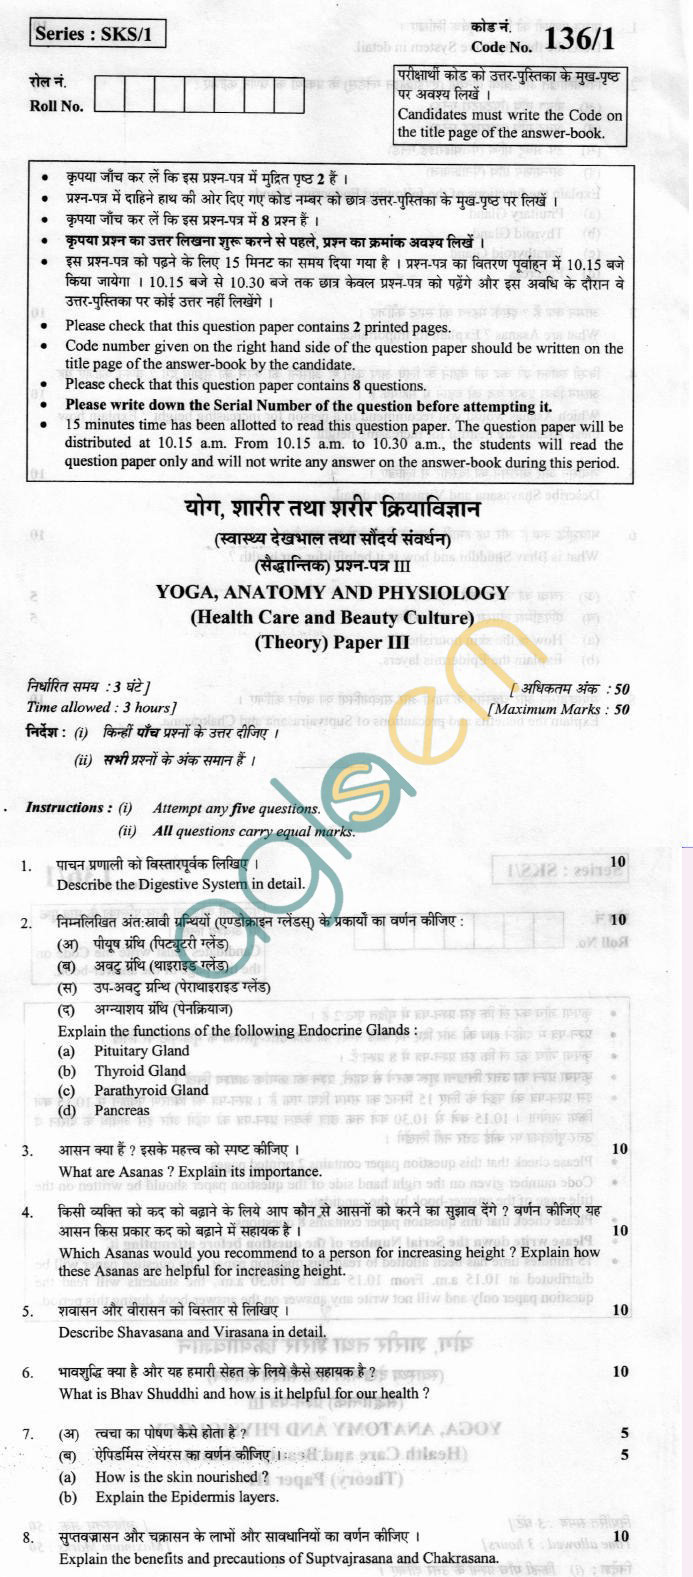 CBSE Board Exam 2013 Class XII Question Paper - Yoga, Anatomy and Physiology